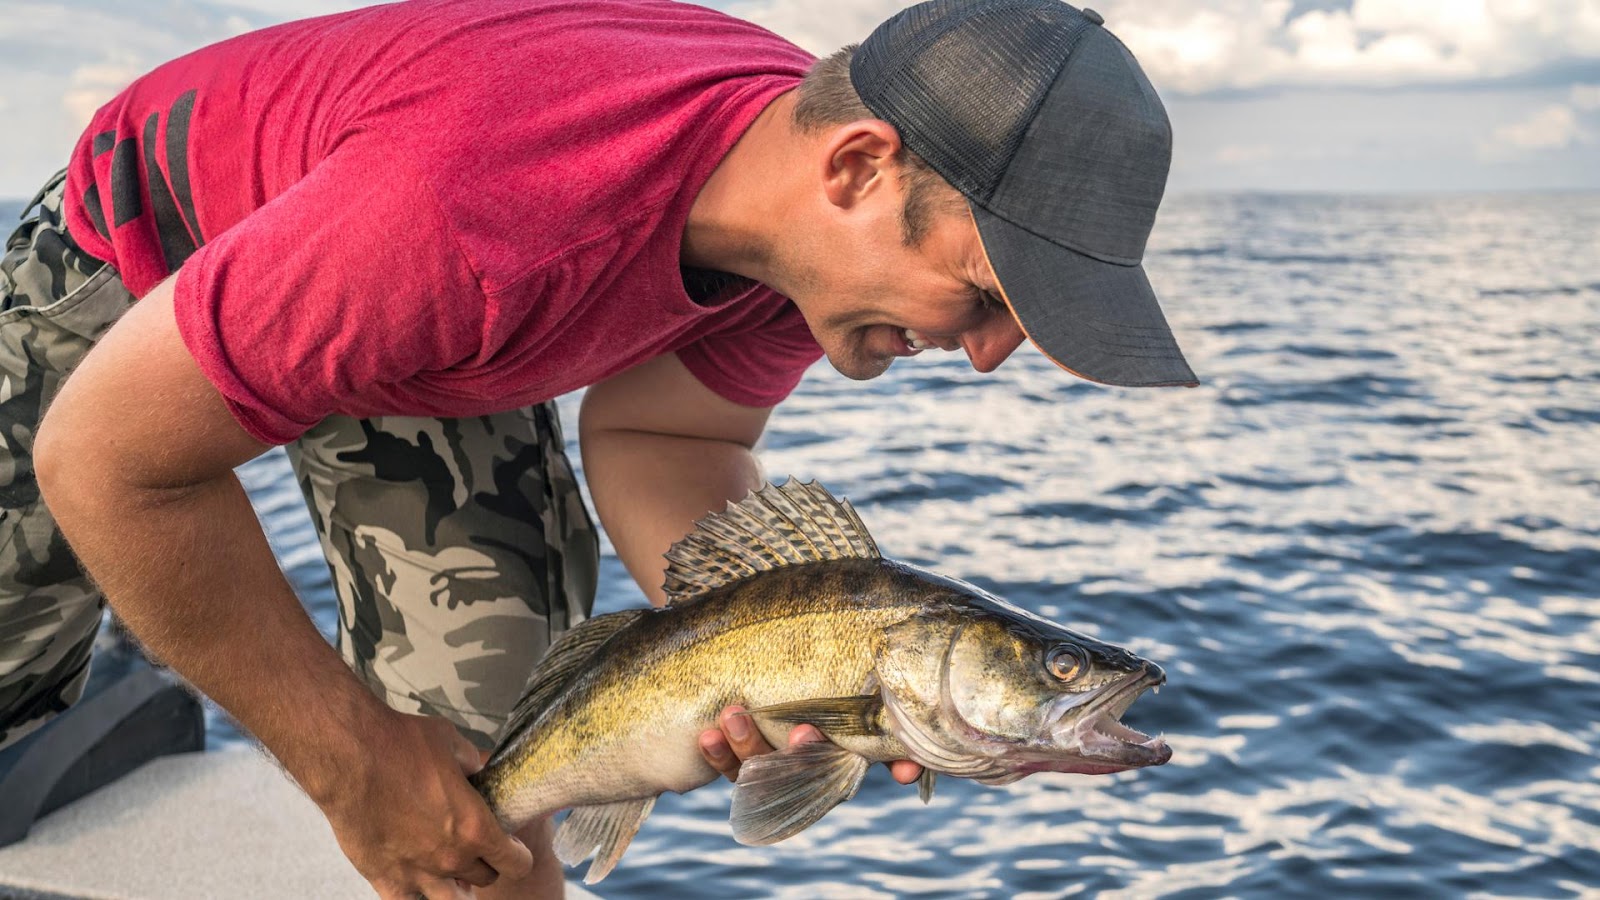 Regulations and Ethics when keep or release walleye fish